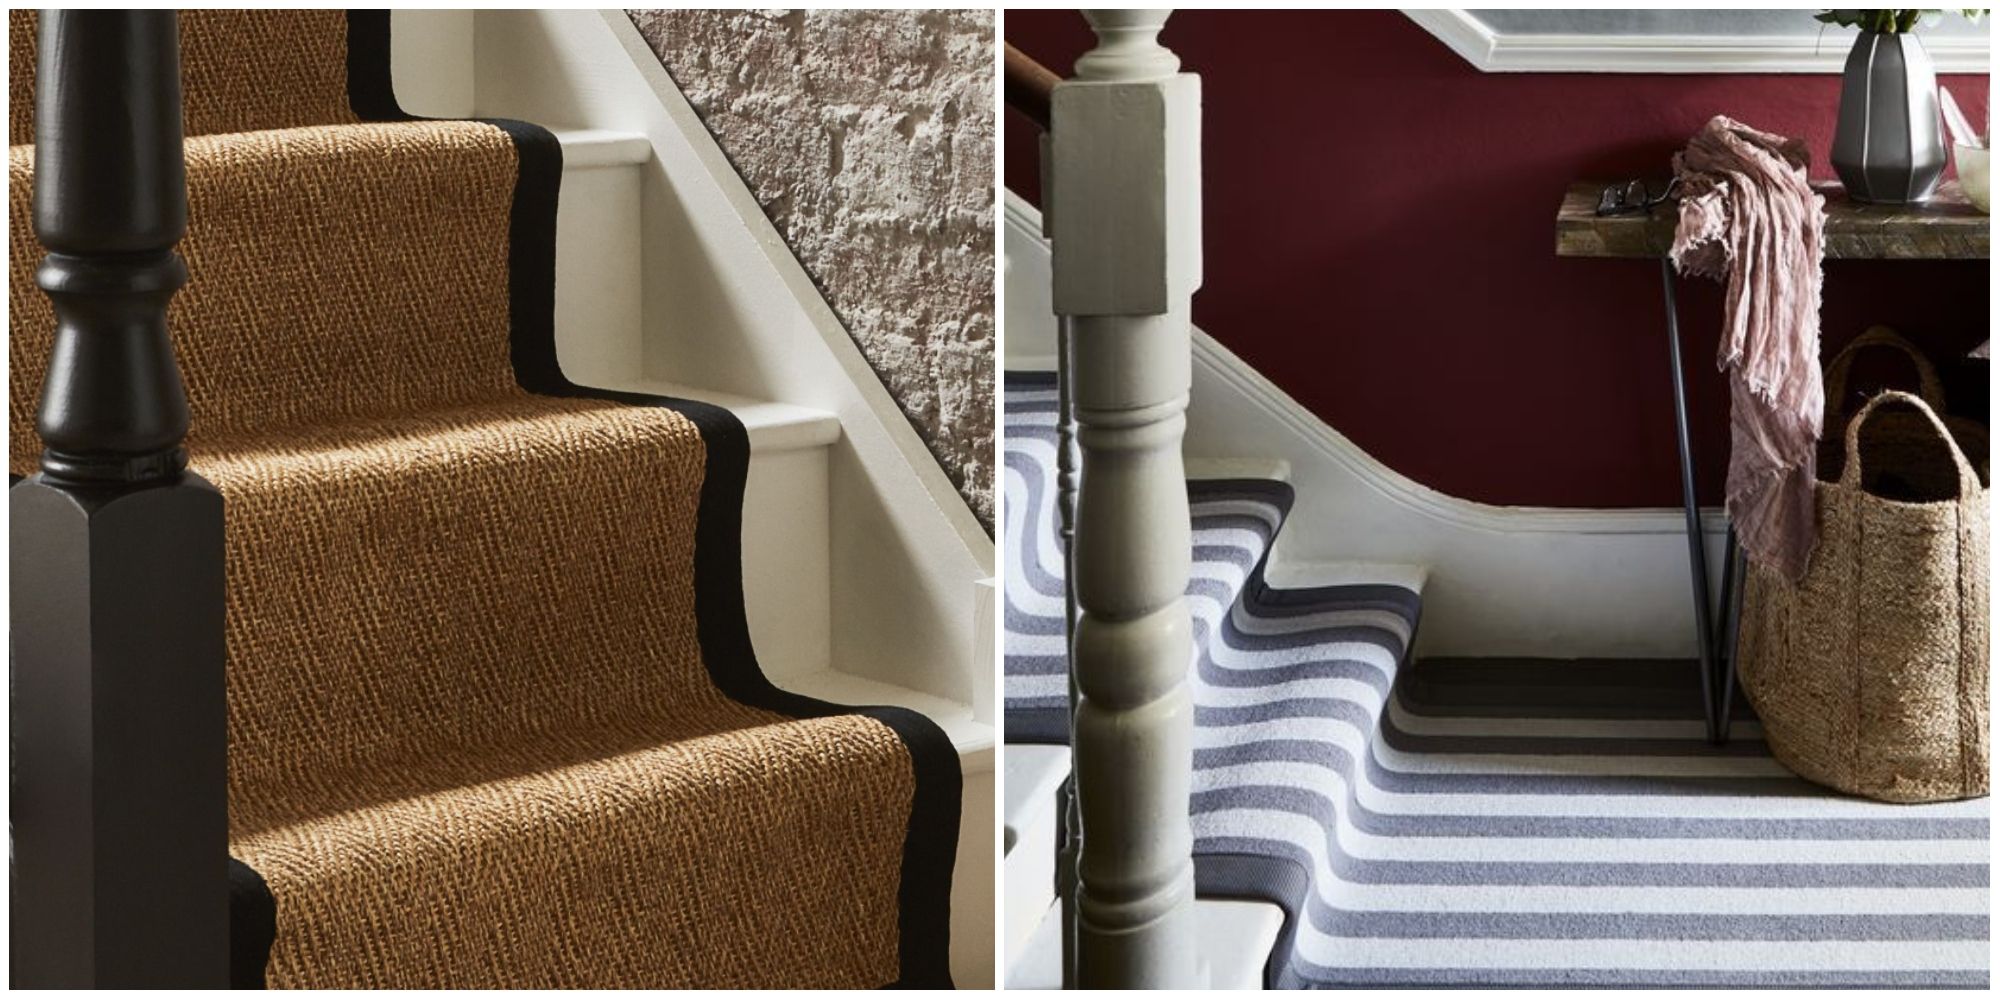 Choosing The Best Carpeting For Your Stairs